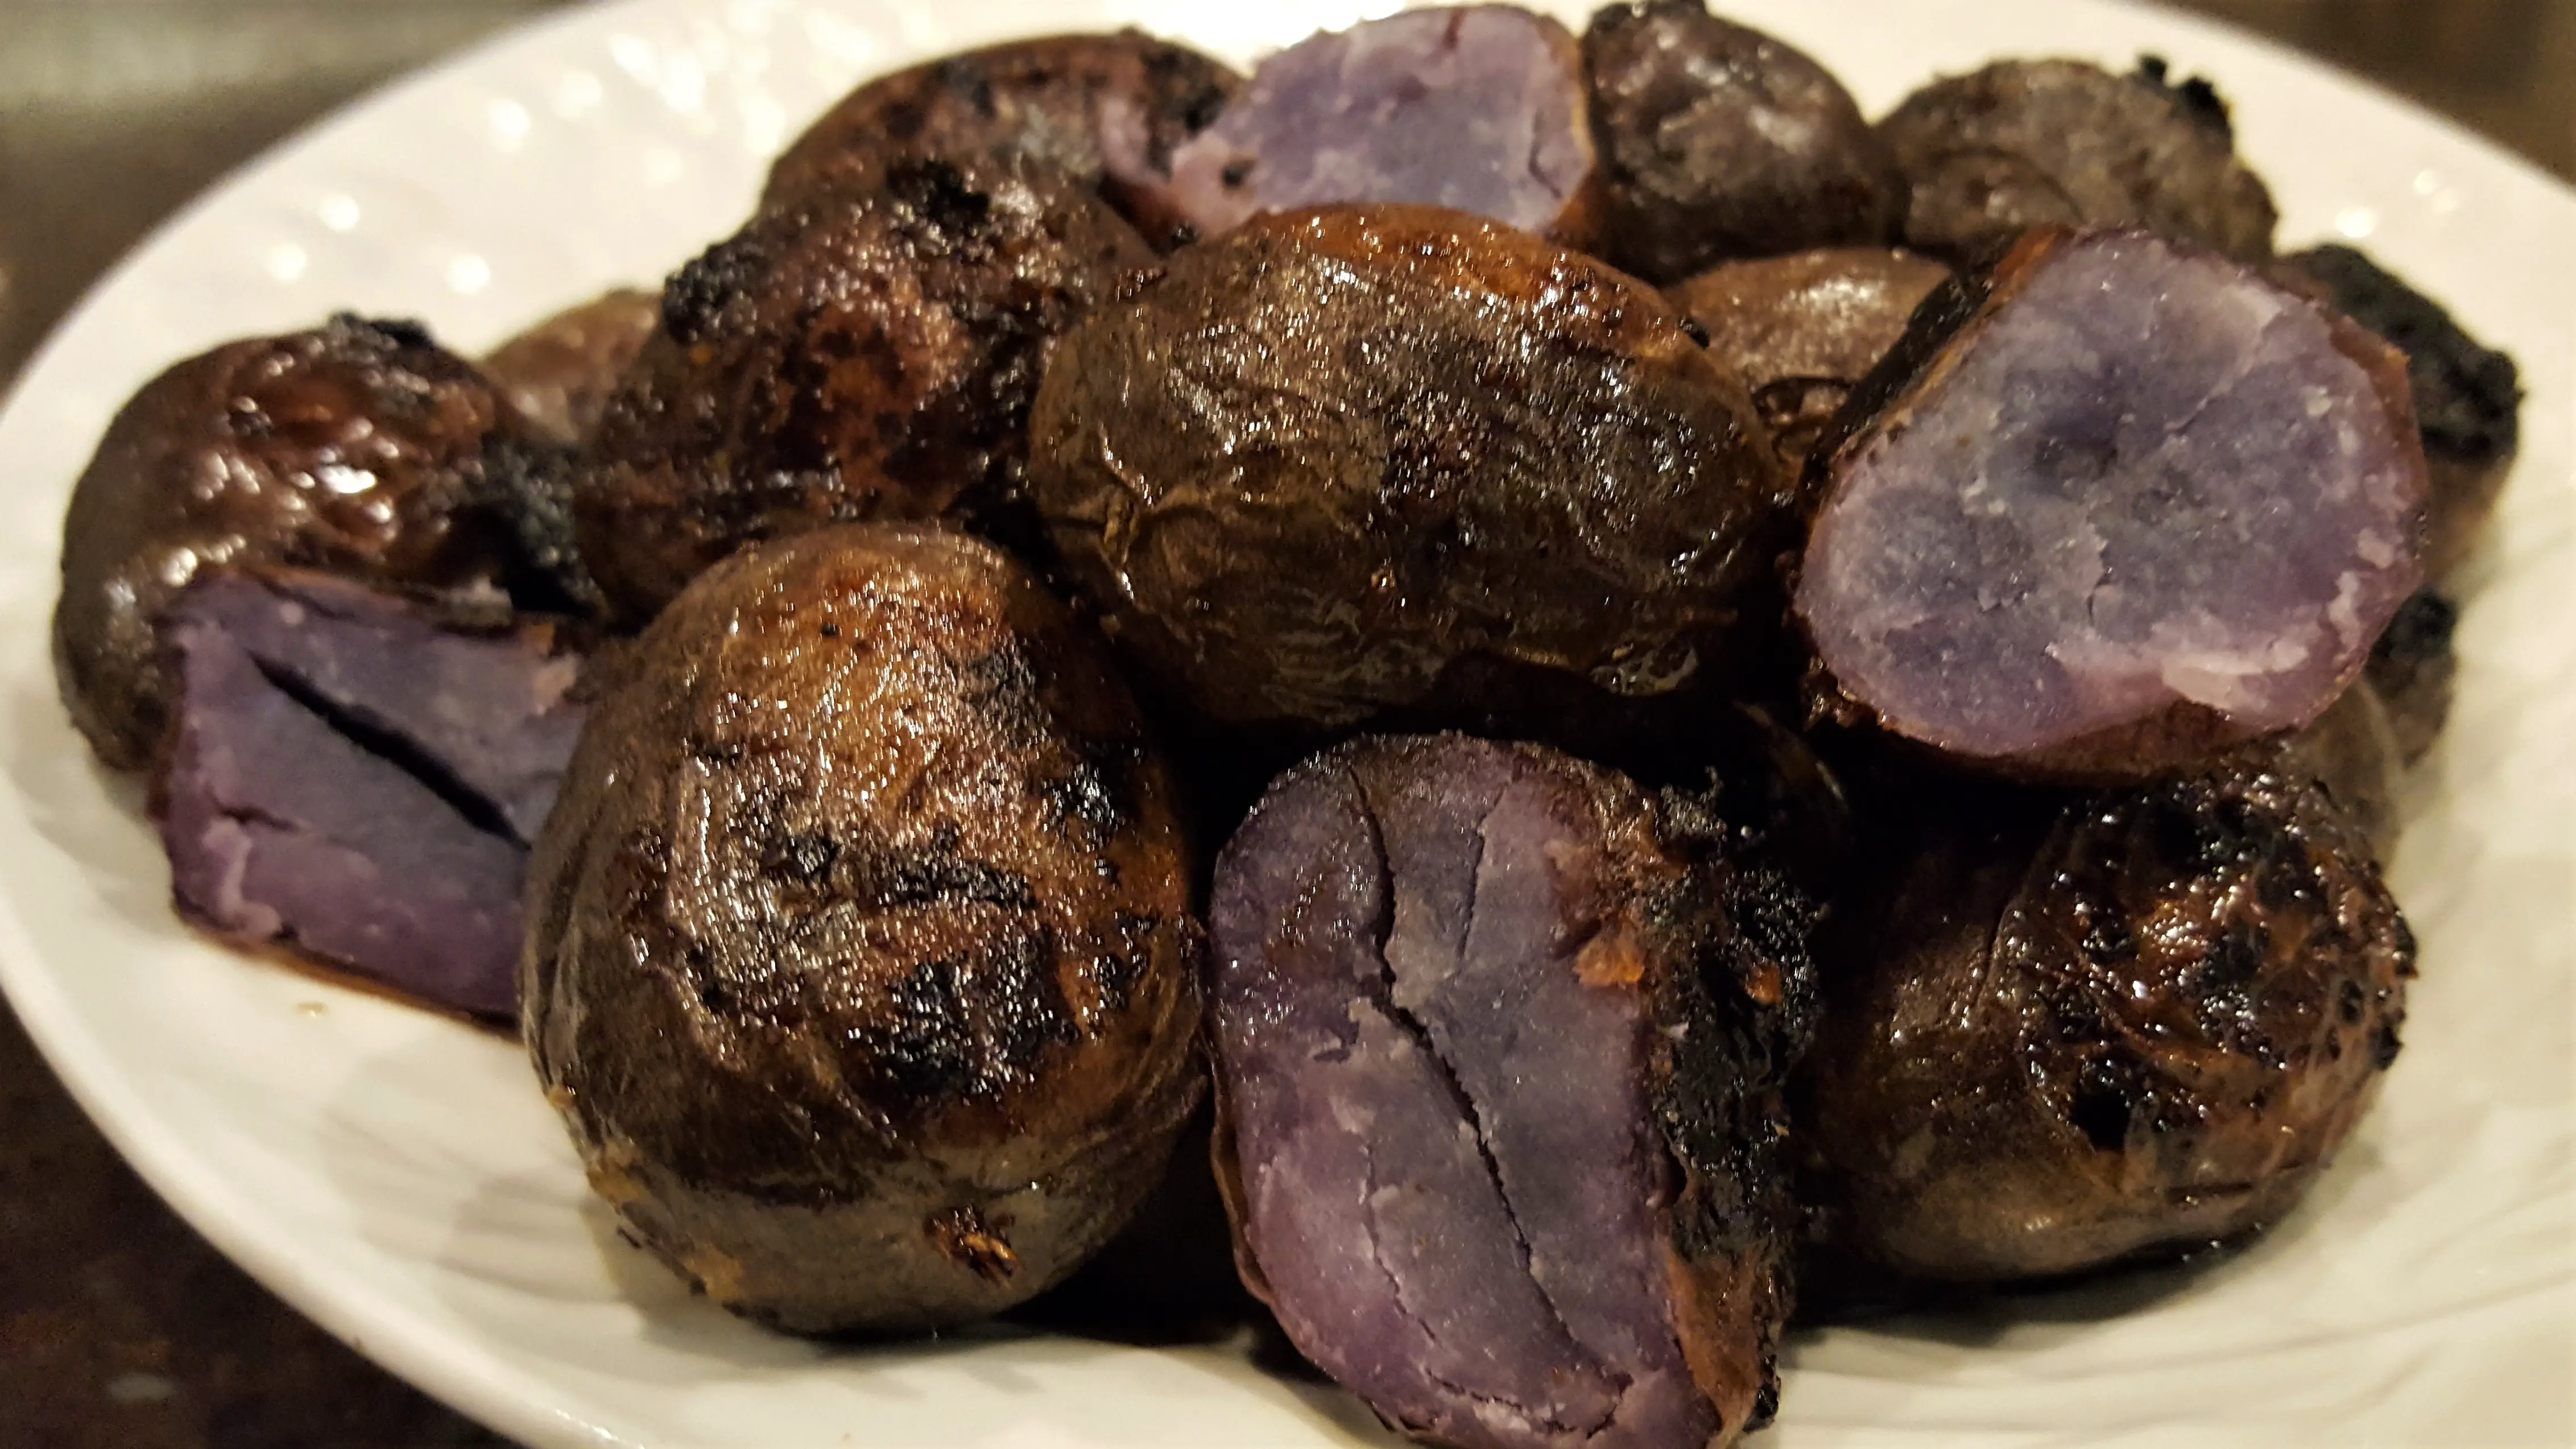 Delicious sweetly roasted garlicky Purple potatoes - Dining in with Danielle